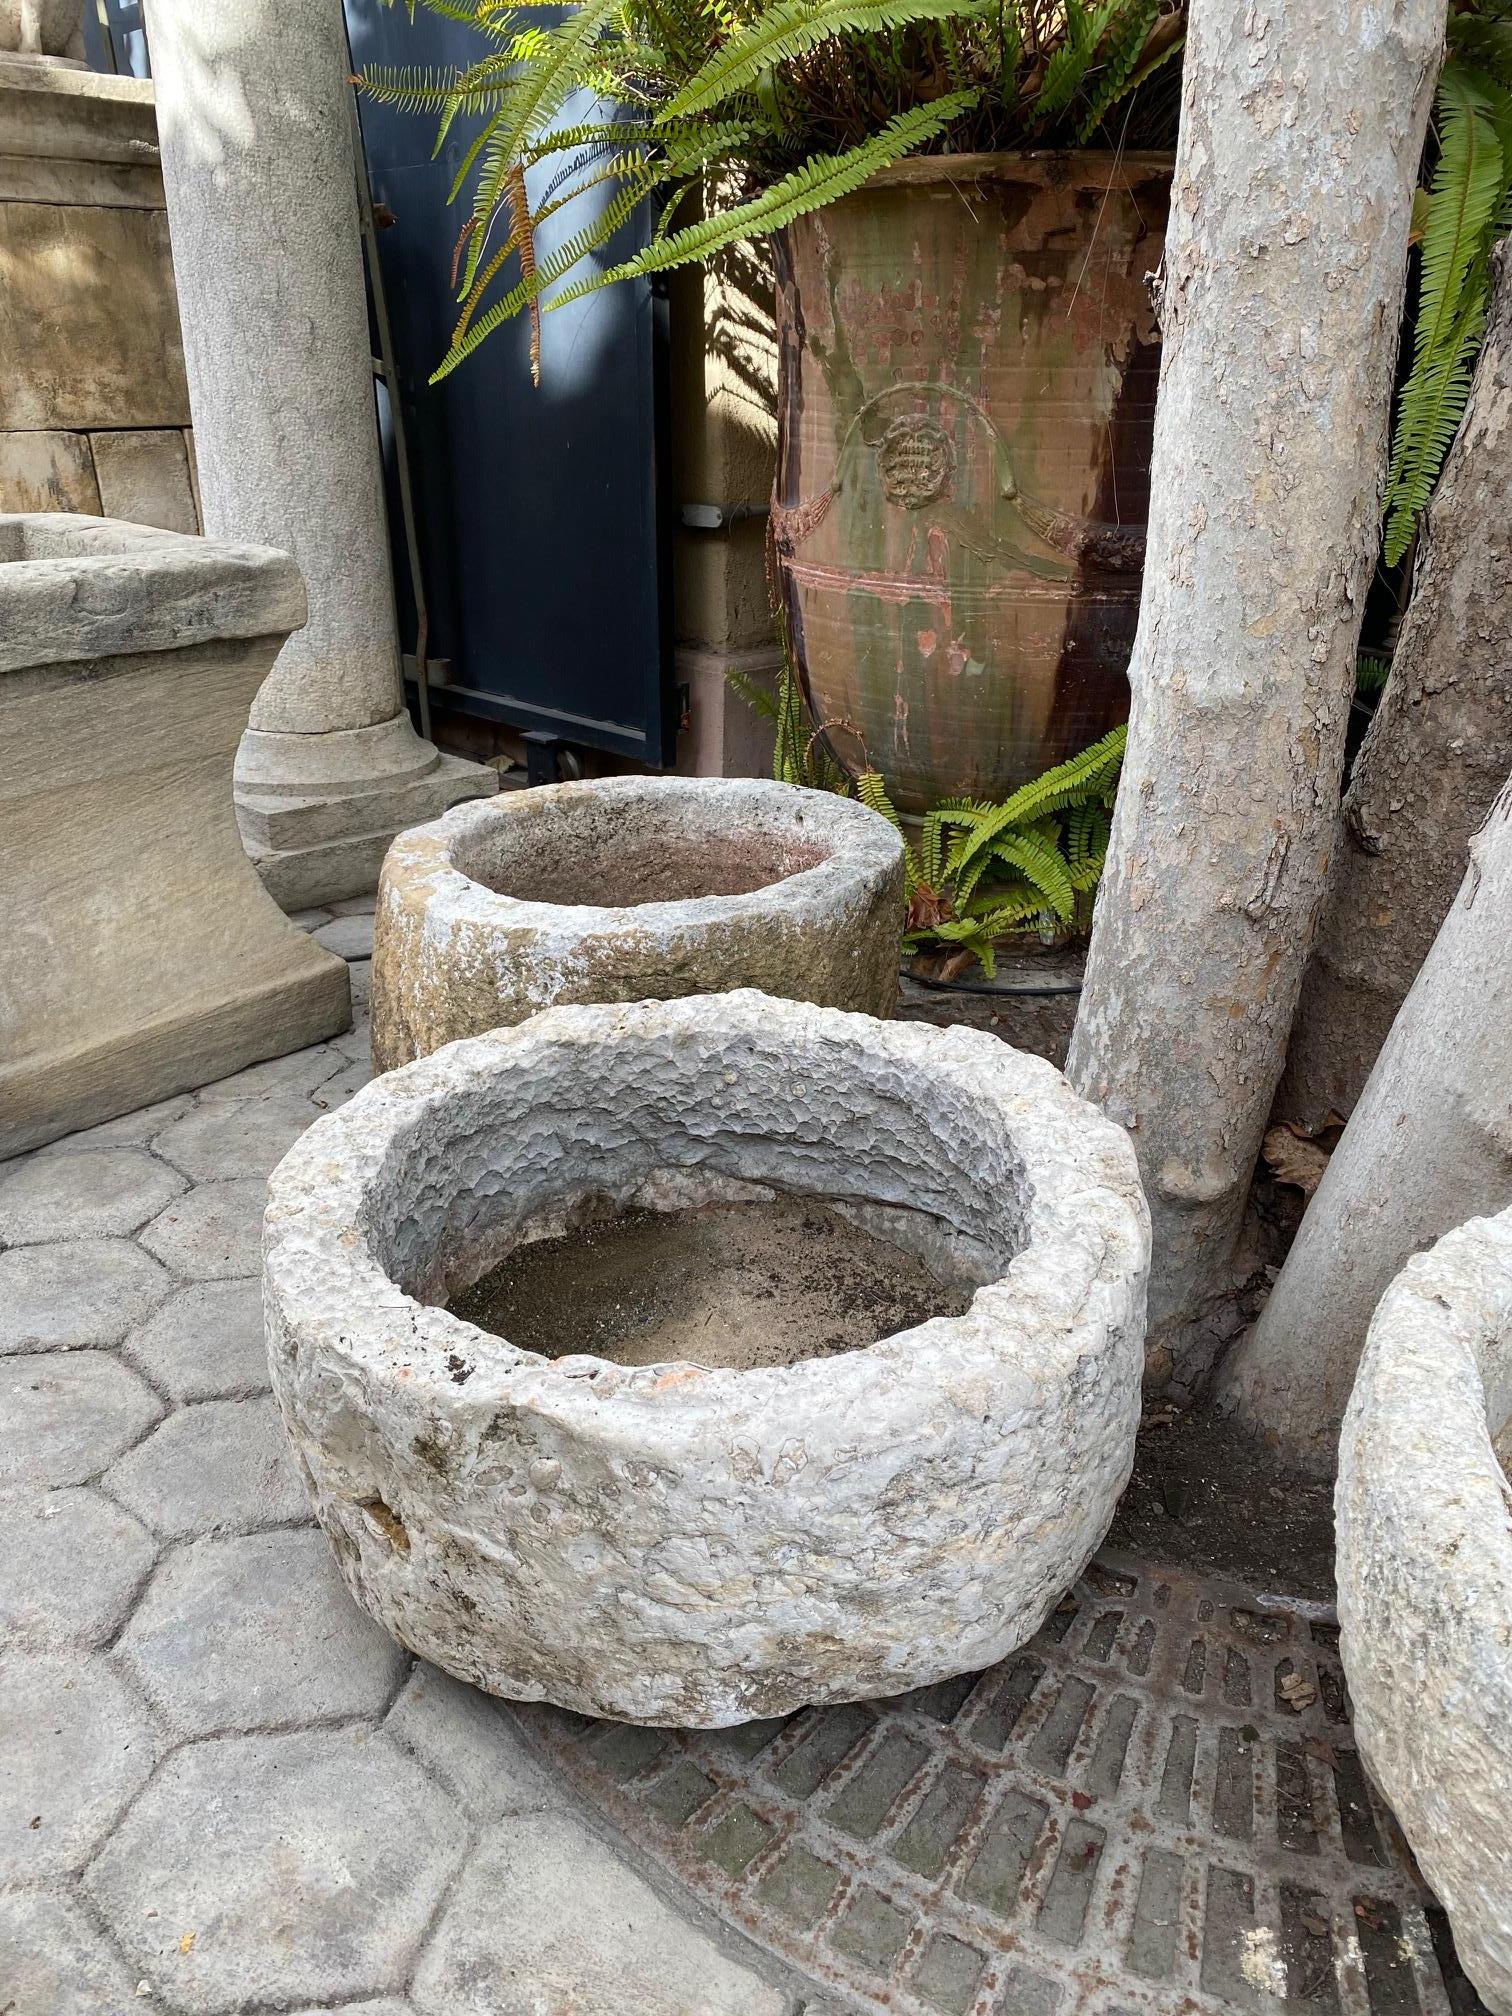 A beautiful 18th / 19th century hand carved stone container basin having a nicely textured surface and patina. It could be standing alone as a decorative object or used as a planter indoor outdoor. This Antique Stone vessel mortar planter has a lot